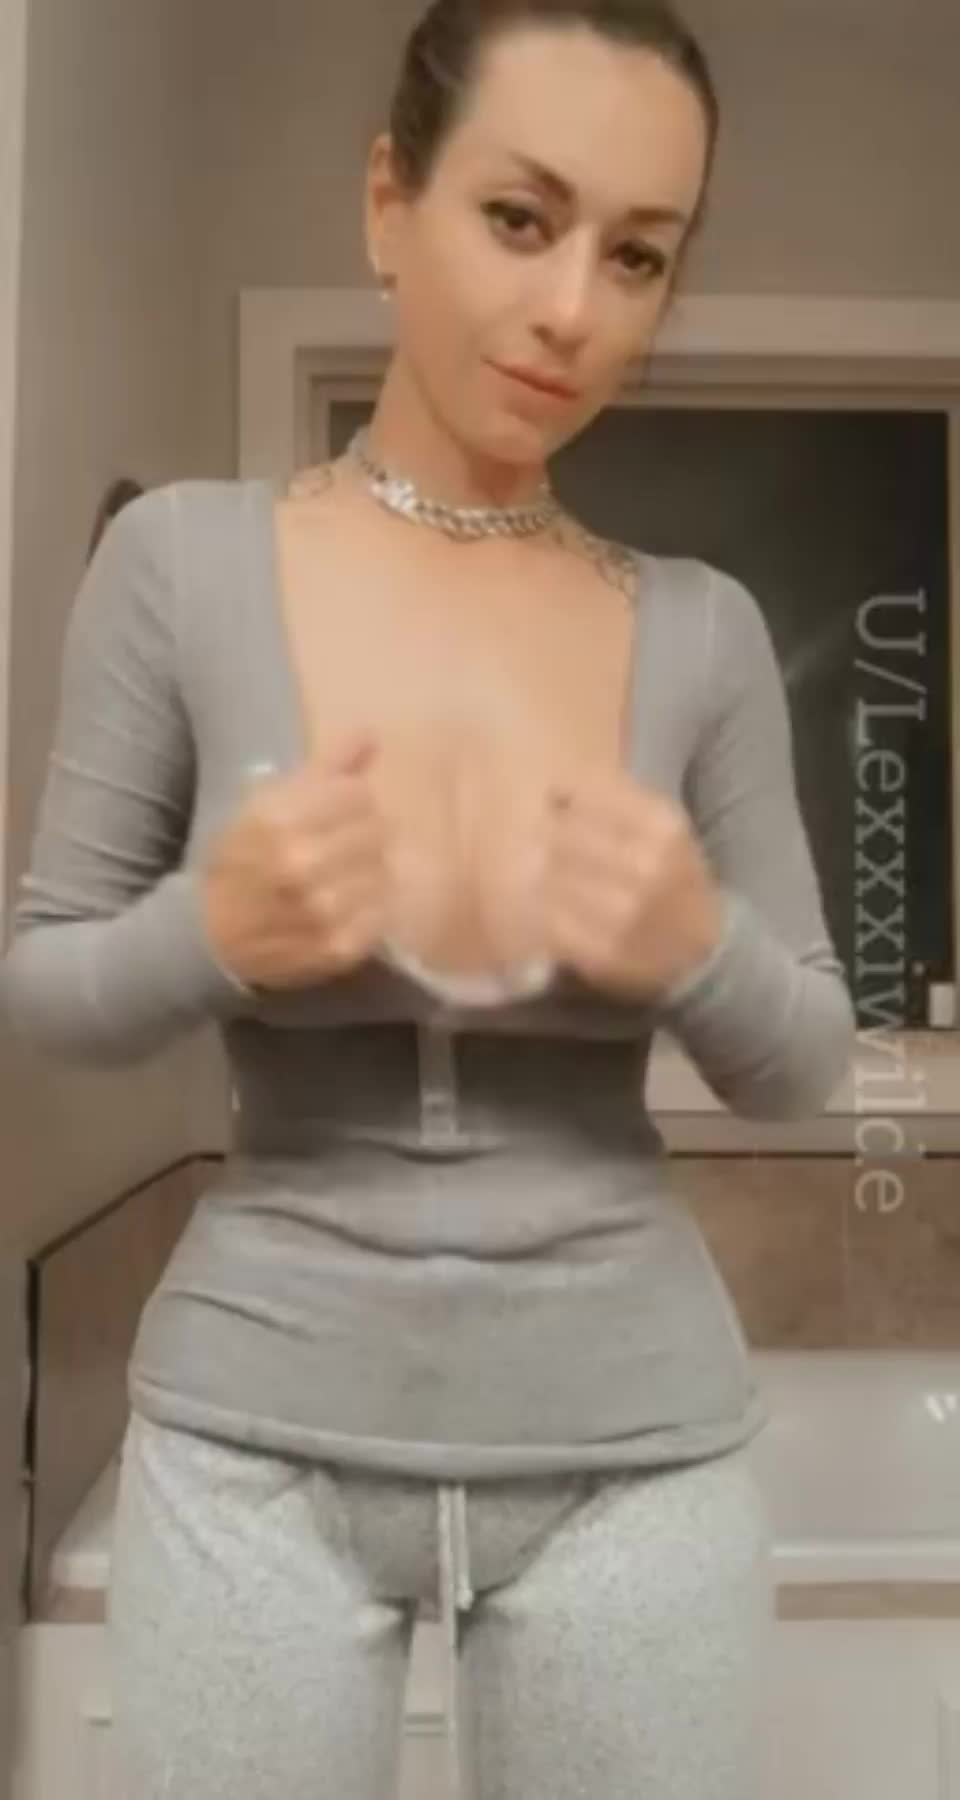 lexxxiwilde tits are glorious